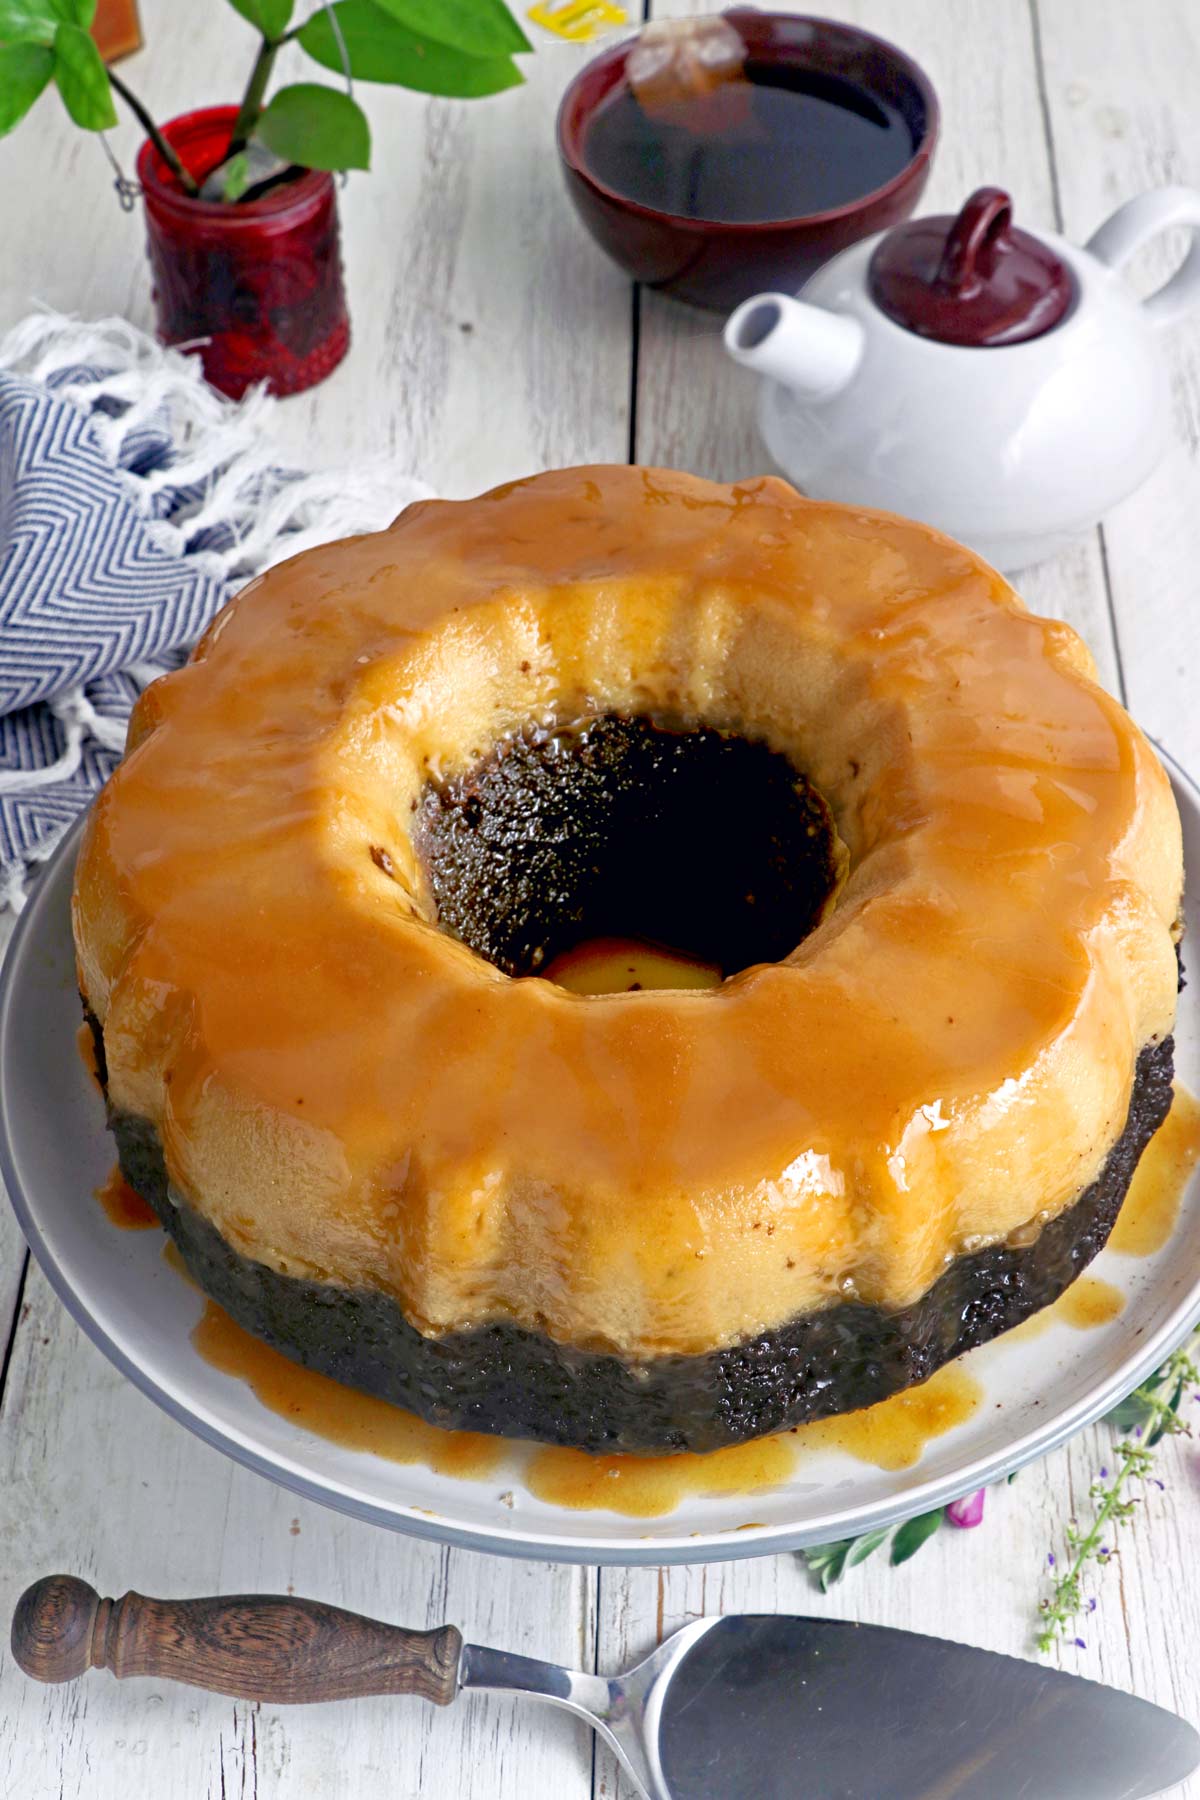 Impossible Cake r Chocoflan served as dessert.